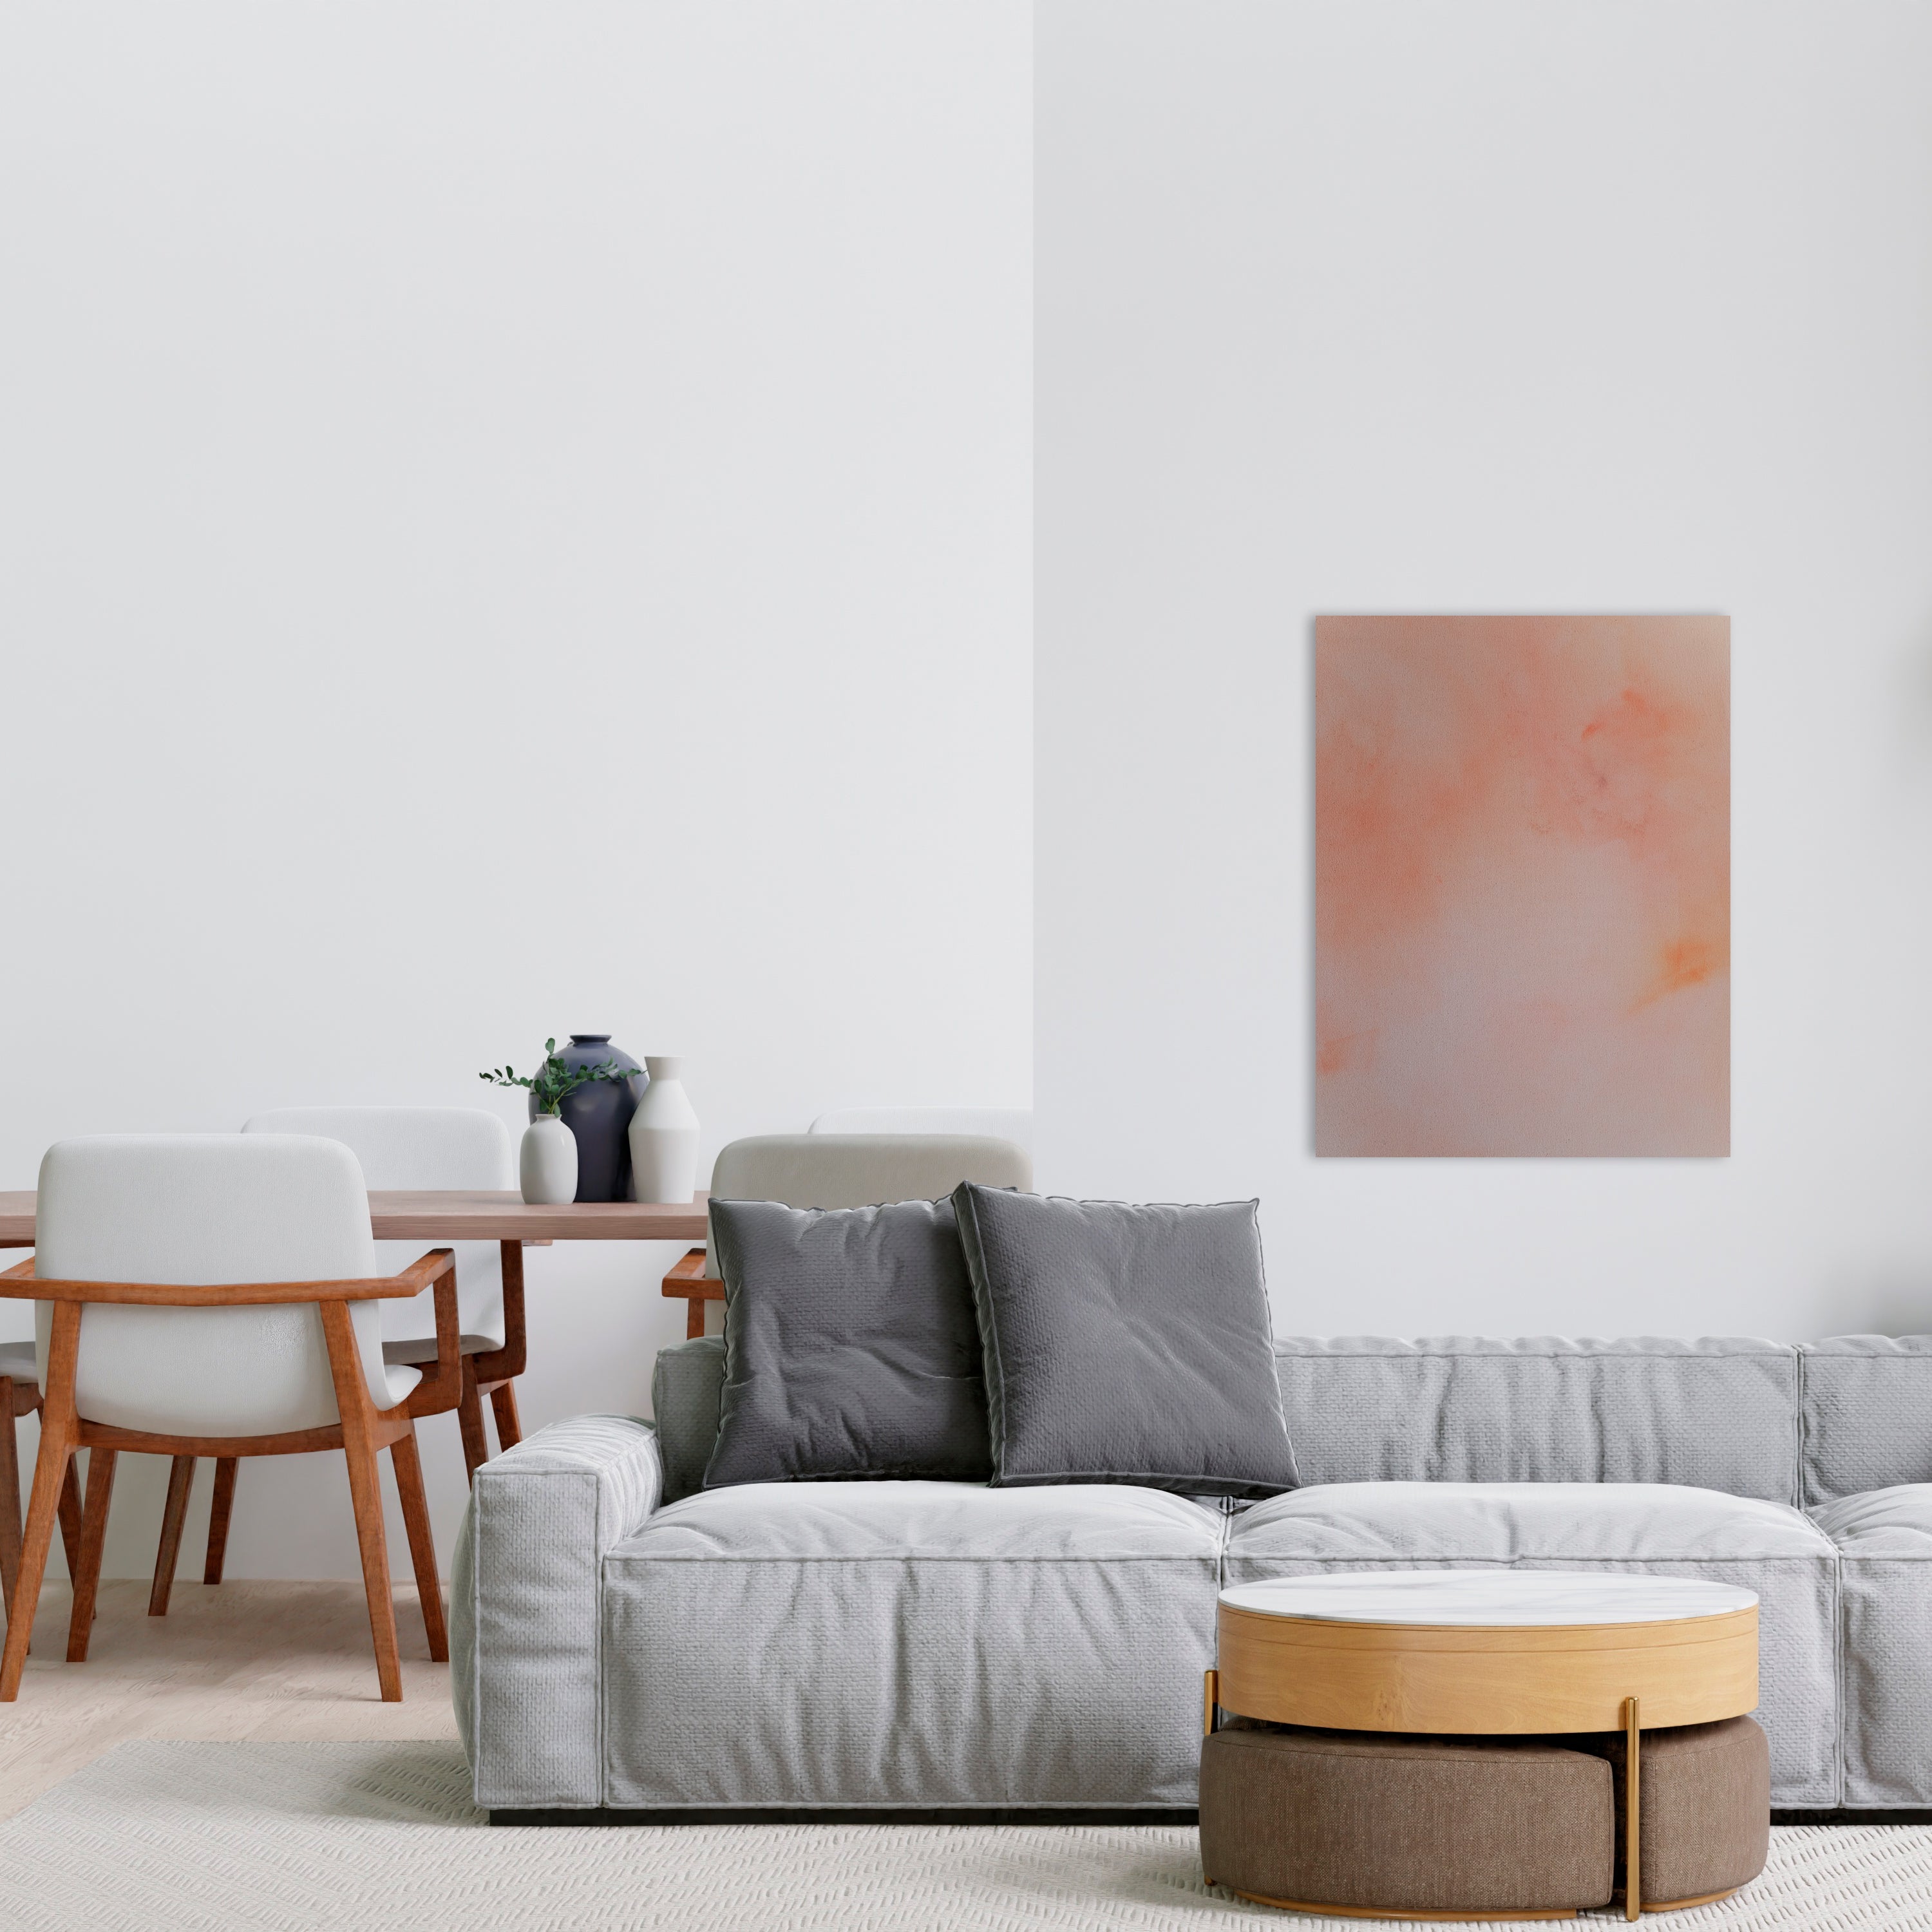 Pink and orange abstract painting hangs above a gray couch in a living room.